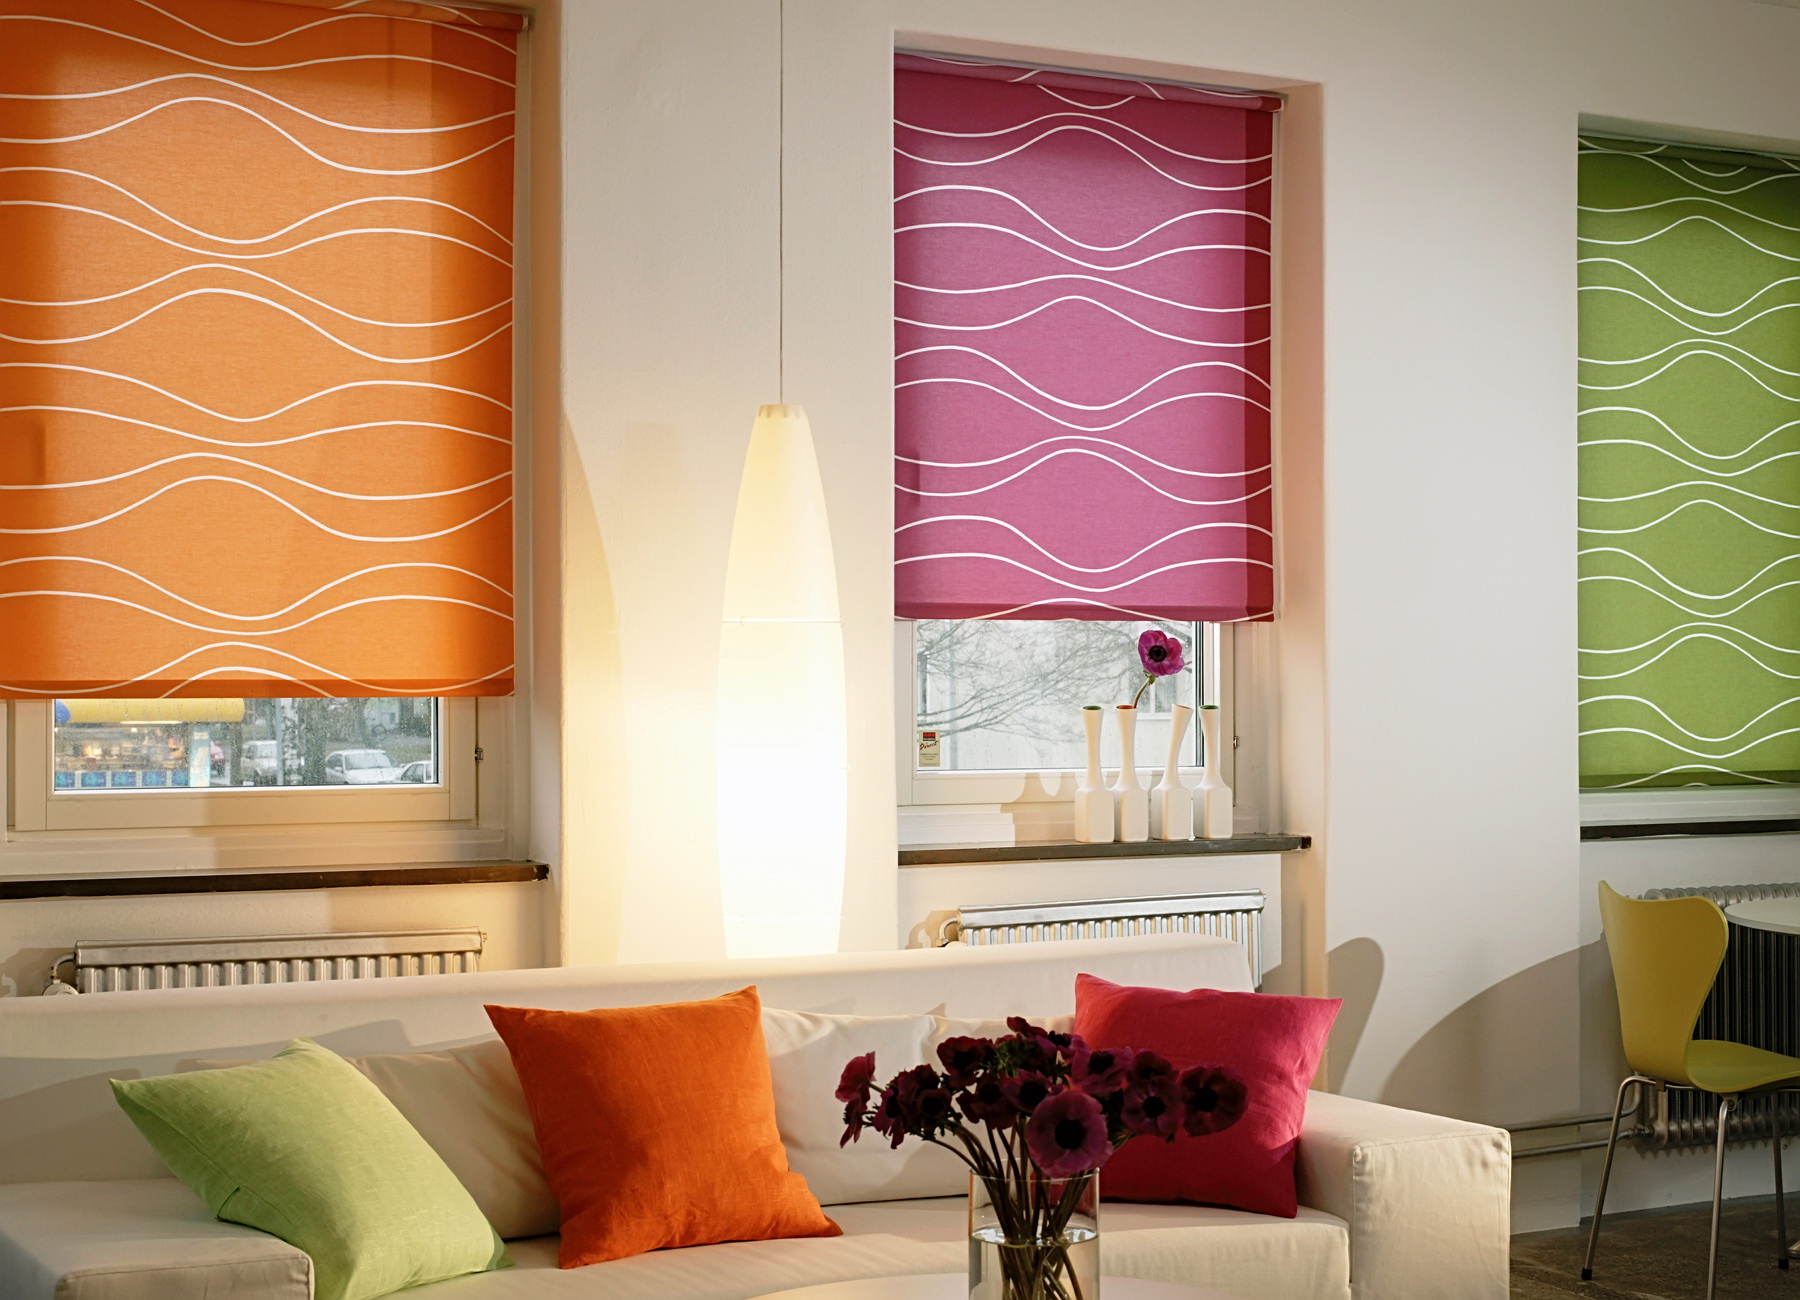 Three windows with roller blinds in various colors